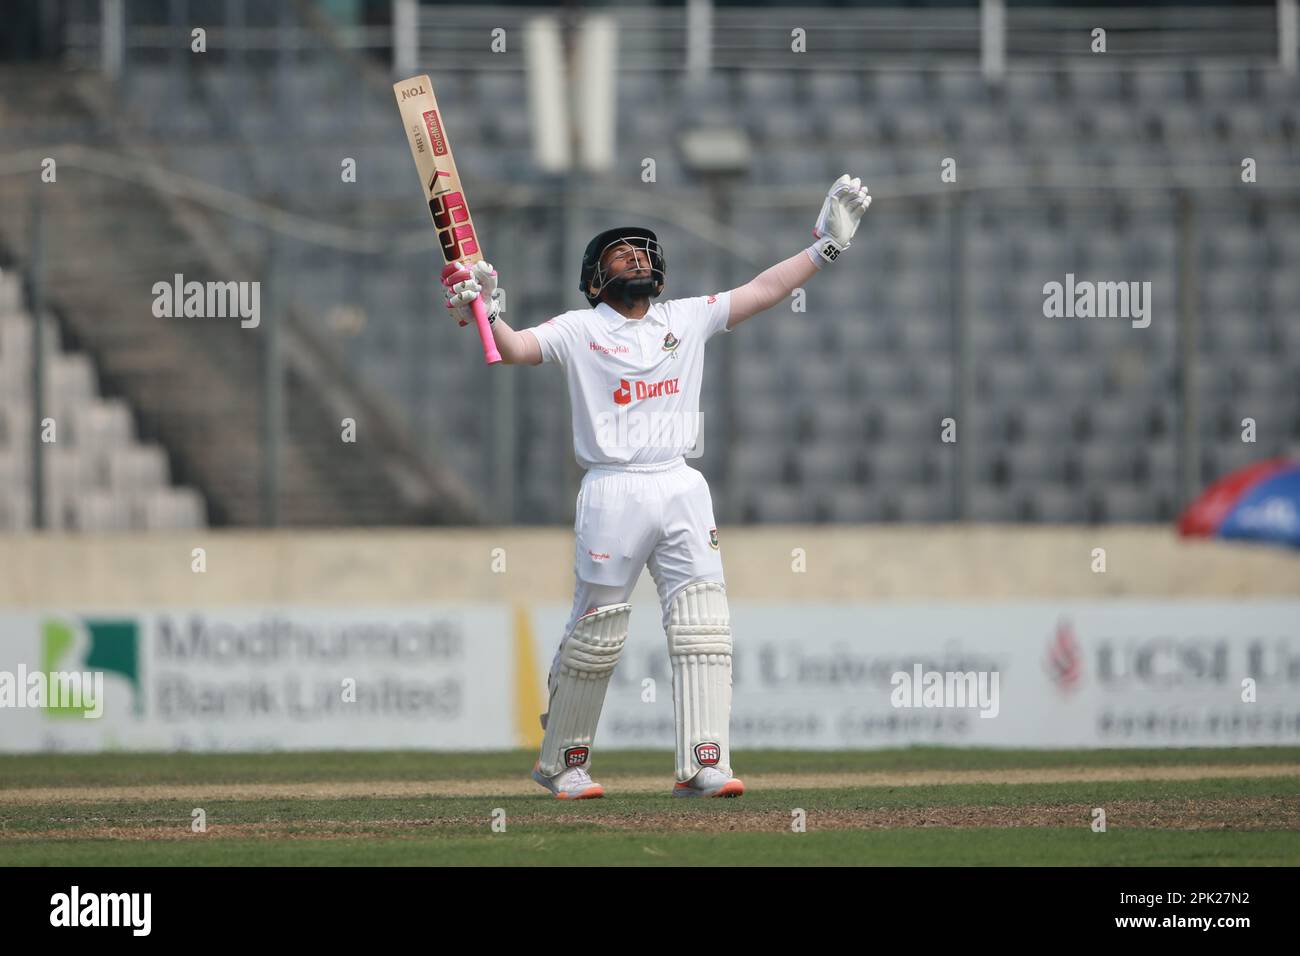 Bangladesh’s veteran batter Mushfiqur Rahim brought up his 10th Test ton during the Tigers’ lone Test against Ireland at the Sher-e-Bangla National St Stock Photo